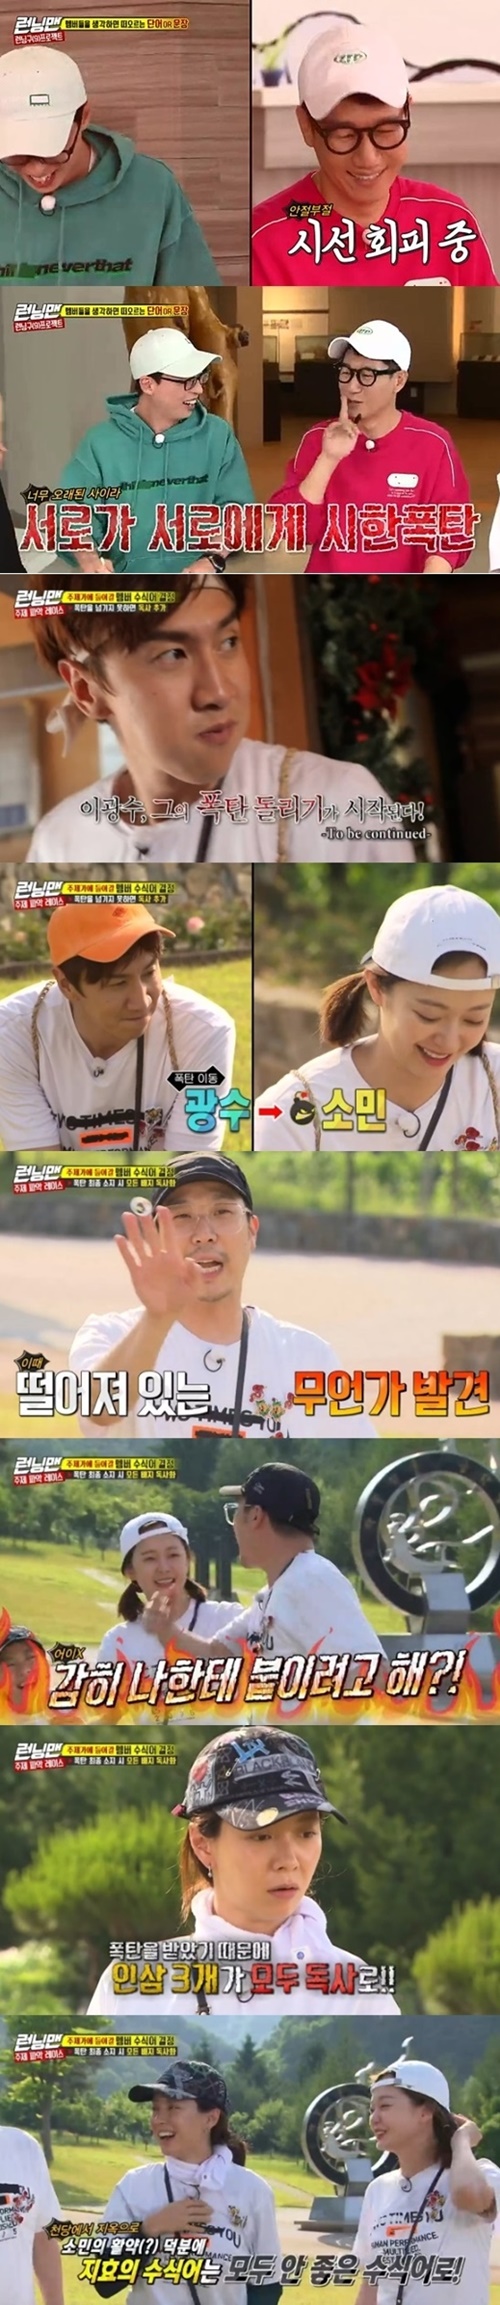 With Jeon So-mins bold performance of Running Man outstanding, he ranked first in the same time zone of the 2049 Target Viewing Rate.According to Nielsen Korea, a ratings agency, the SBS entertainment program Running Man, which was broadcast on the 16th, soared to 8.4% of the highest audience rating per minute.The 2049 target audience rating, which is an important indicator of major advertising officials, recorded 3.8% (based on the second part of the Seoul Capital Areas household ratings), ranking first in the same time zone, surpassing Masked Wang and Donkey Ears.The average audience rating was 5.2% in the first part and 6.8% in the second part (based on the audience rating of households in the Seoul Capital Area).Because there is a time limit for bombs, if you pass that time, you will get a viper badge. Even if you take it, you will get another viper badge.Among them, Jeon So-min showed off the like a poison that led to the reversal, shook the plate of the race, and noticed that he had a bomb late on the last mission.The scene soared to 8.4% of the audience rating per minute, accounting for the best one minute.So, Jeon So-min showed boldness of handing over his bomb to Song Ji-ryu, and Song Ji-hyo, who ran Race 1st pRace, had to watch his ginseng badge turned into a poison badge at the last minute.Yoo Jae-Suk took the first pRace in the race with Fisherman Jiri, and Yoo Jae-Suk chose a modifier to enter the theme song based on the badge of each member.